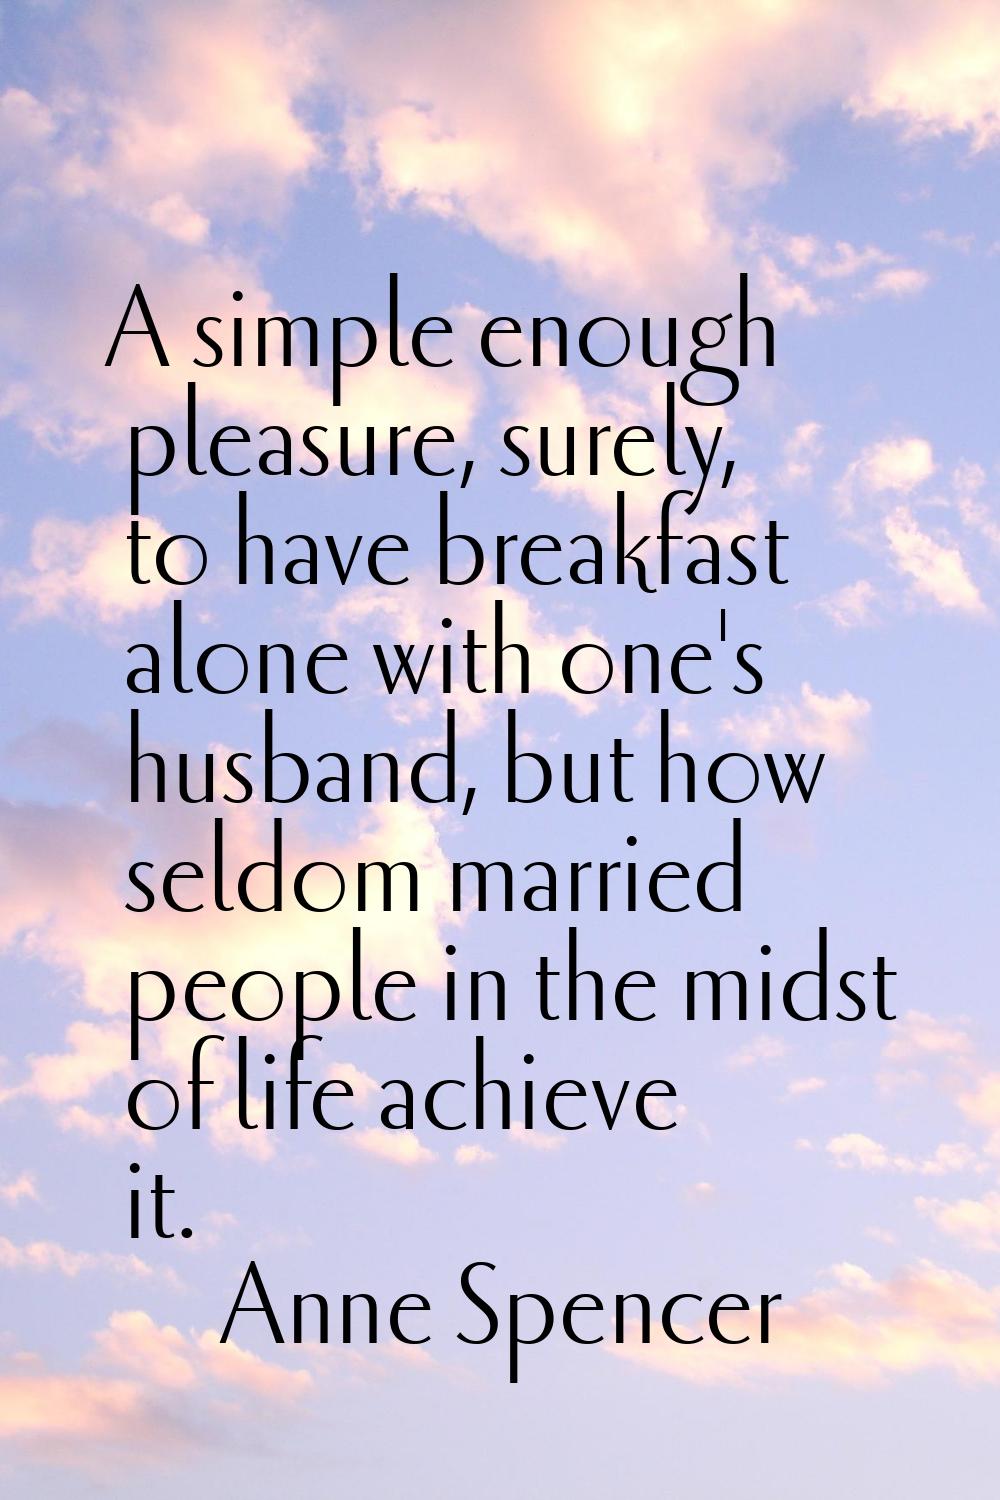 A simple enough pleasure, surely, to have breakfast alone with one's husband, but how seldom marrie